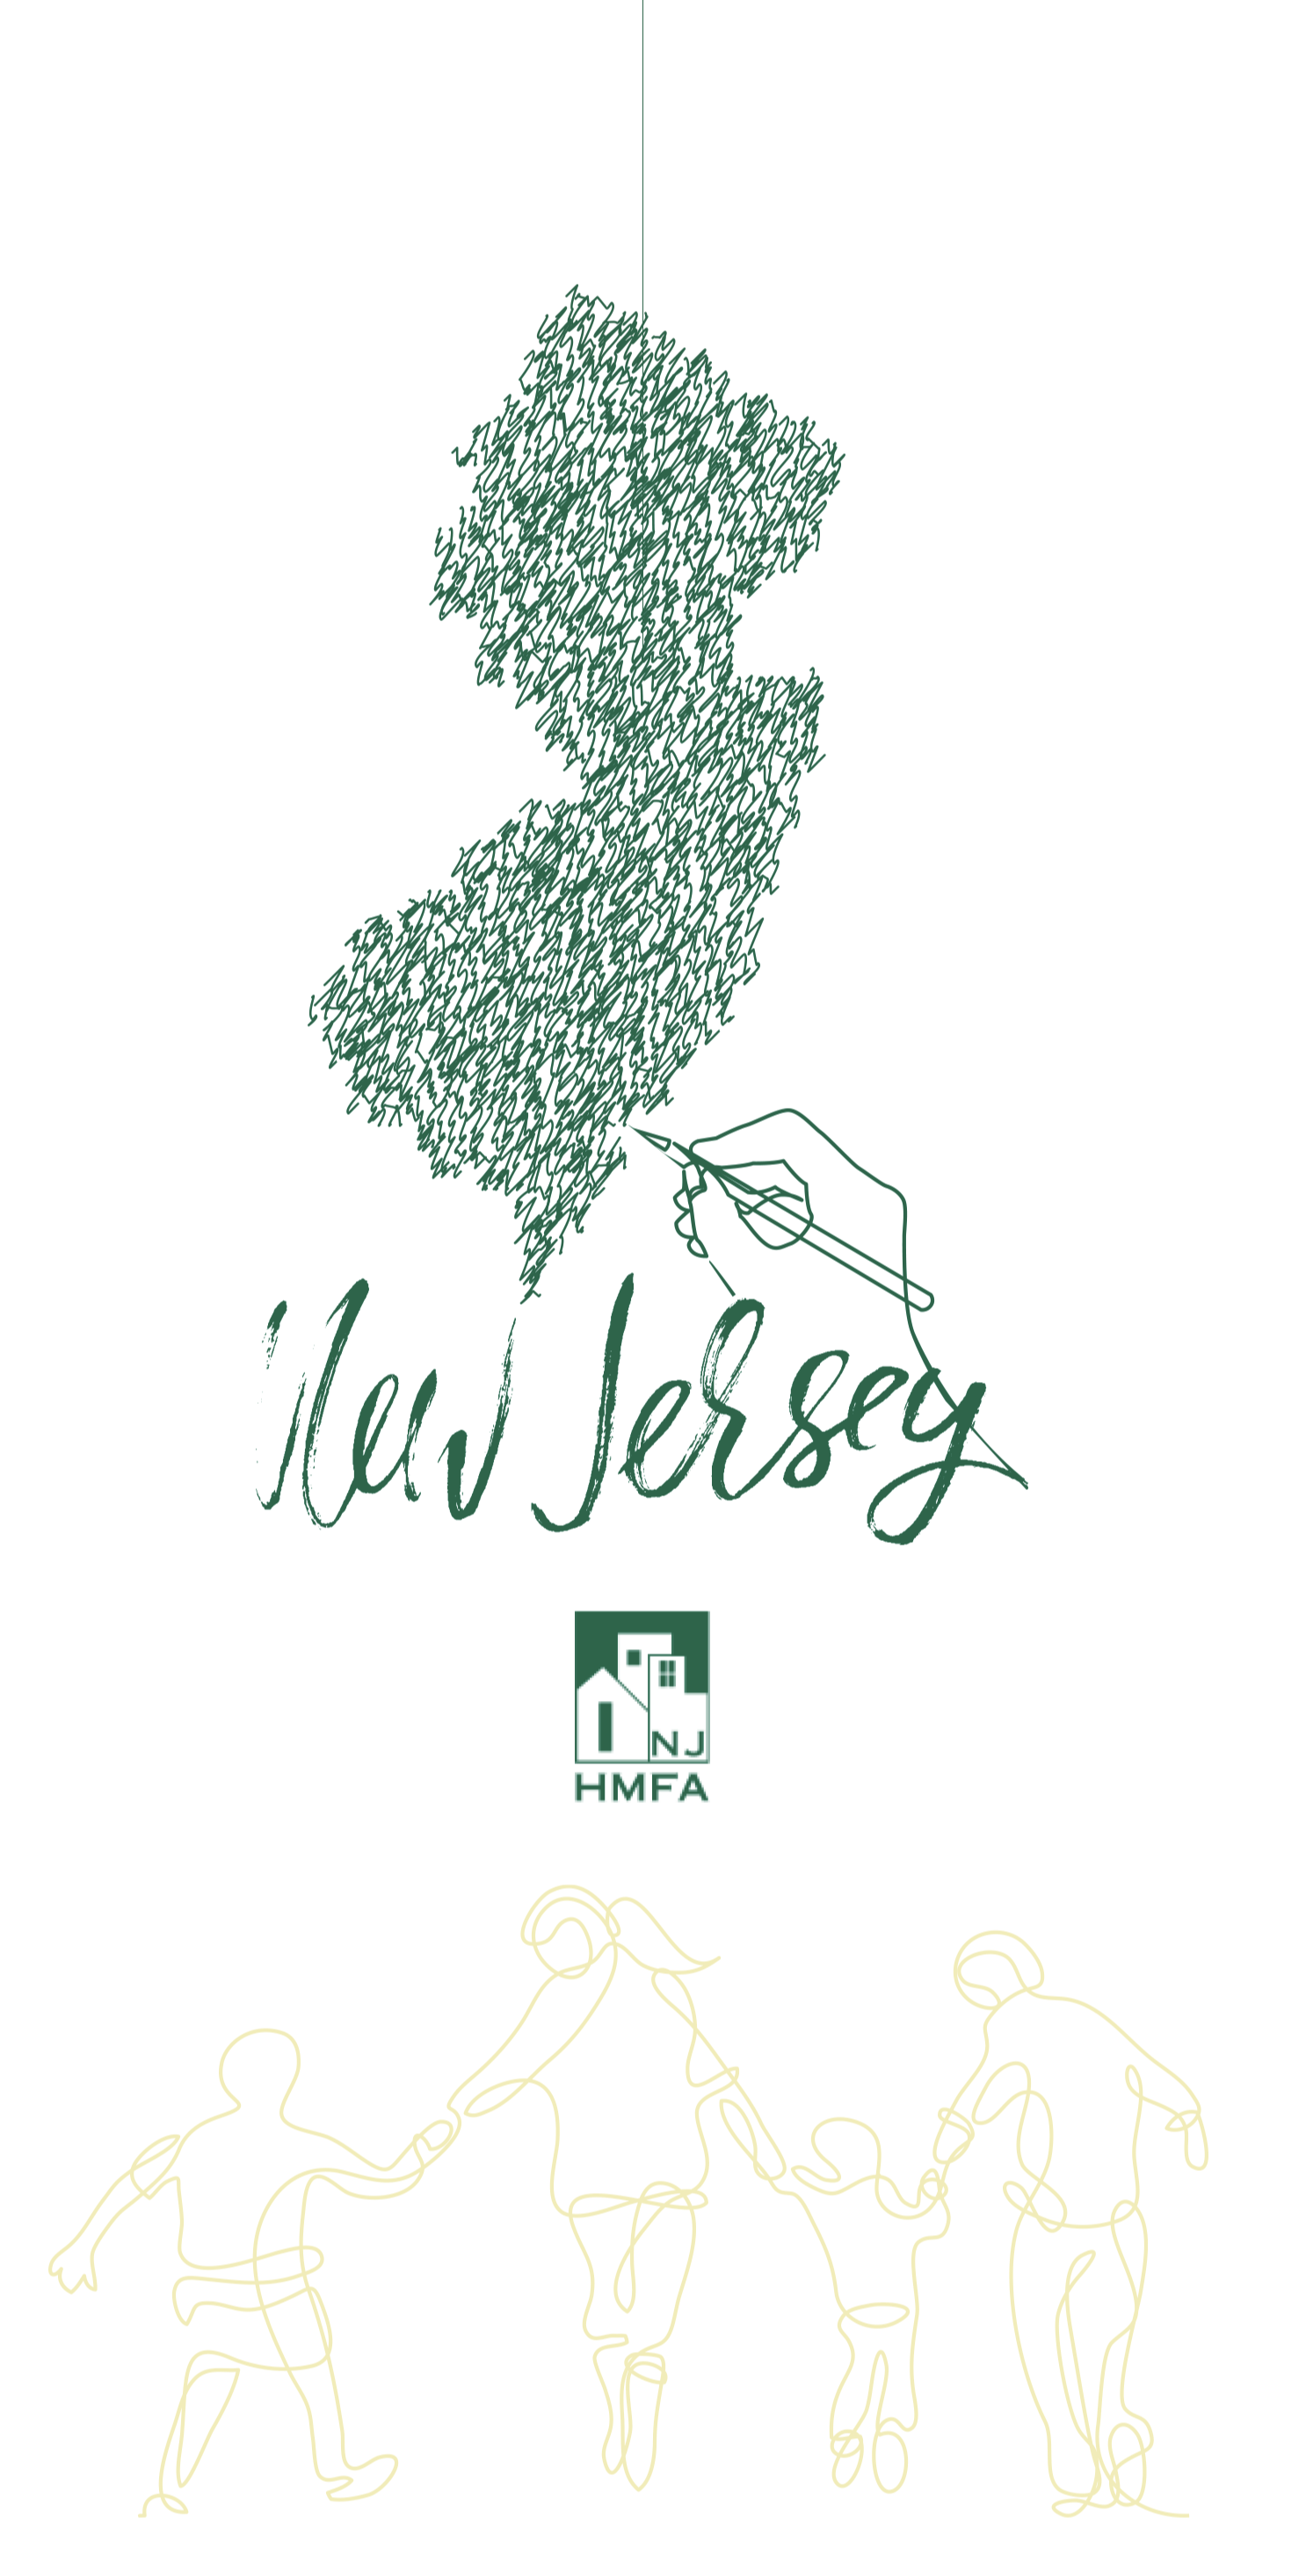 A sketch where a hand is drawing a map of New Jersey